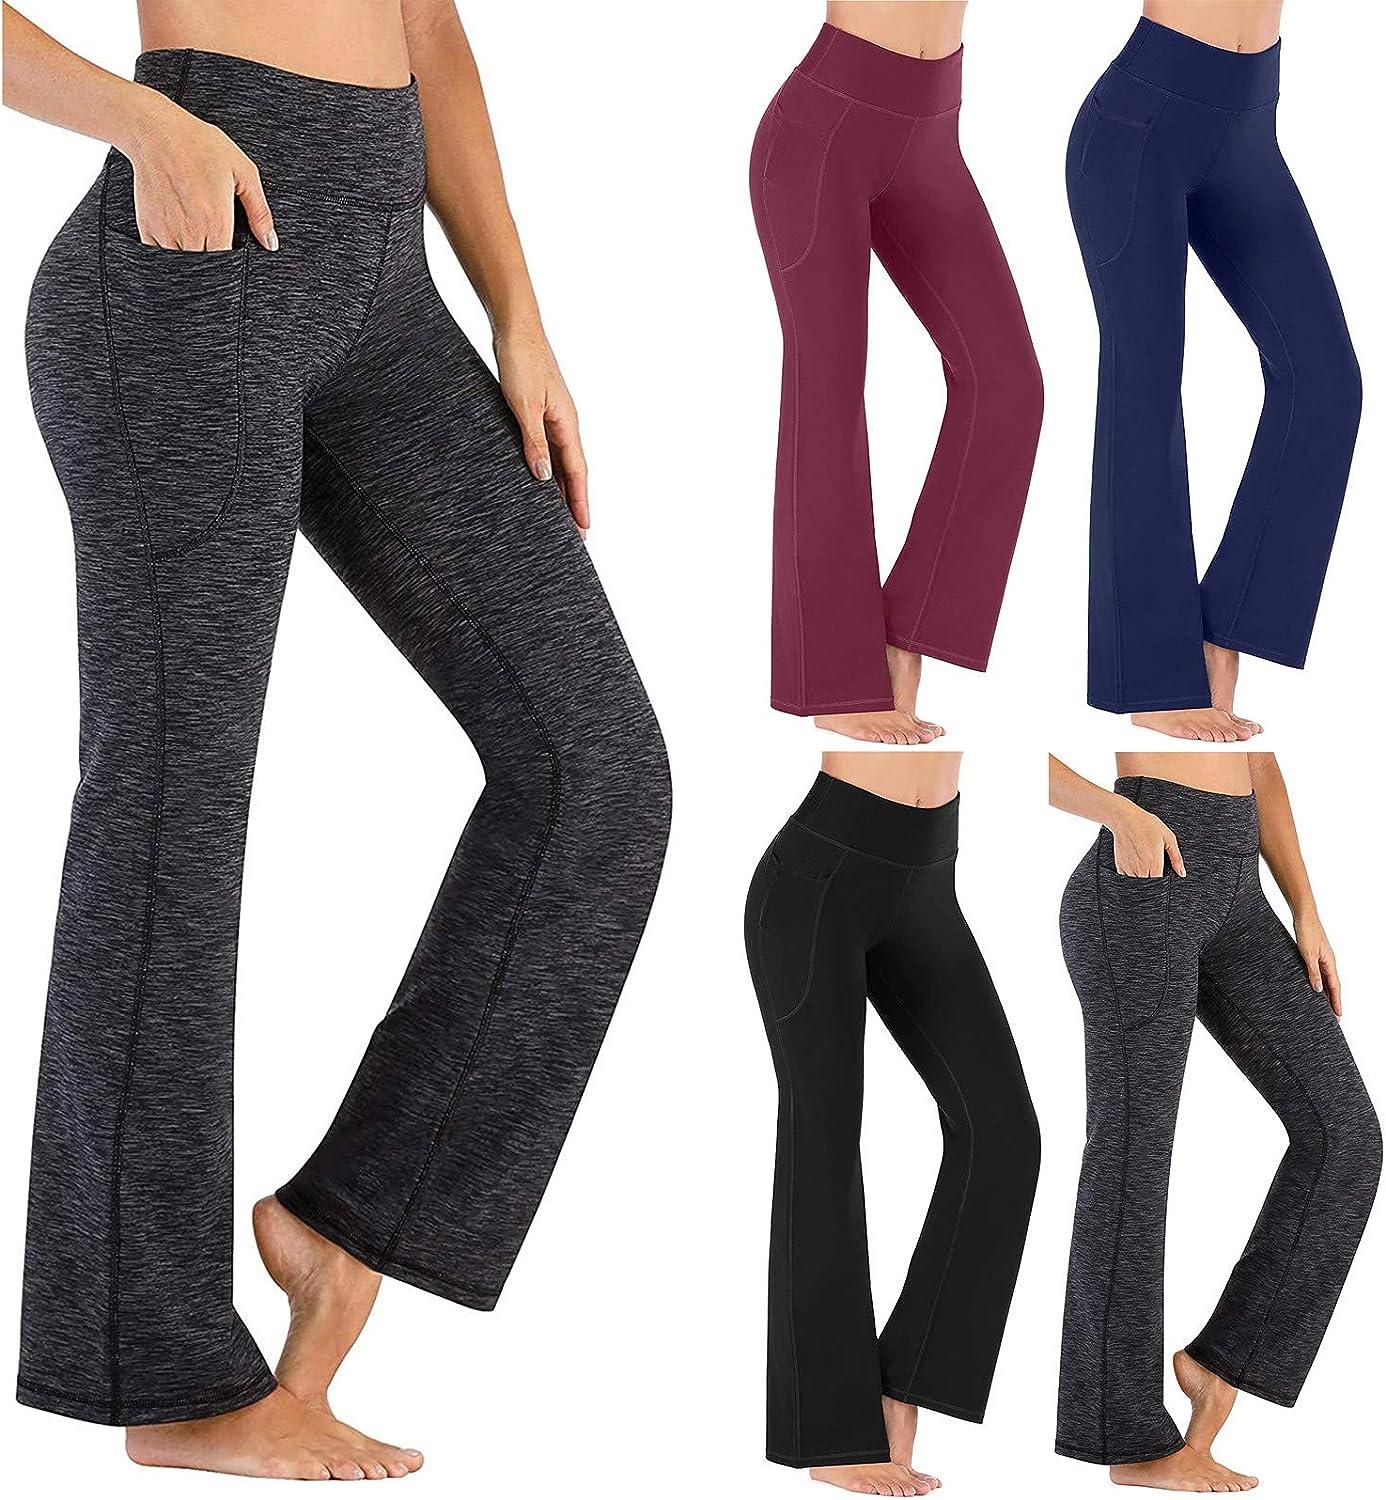 VEZAD Women's Boot-Cut Yoga Pants Tummy Control Workout Non See